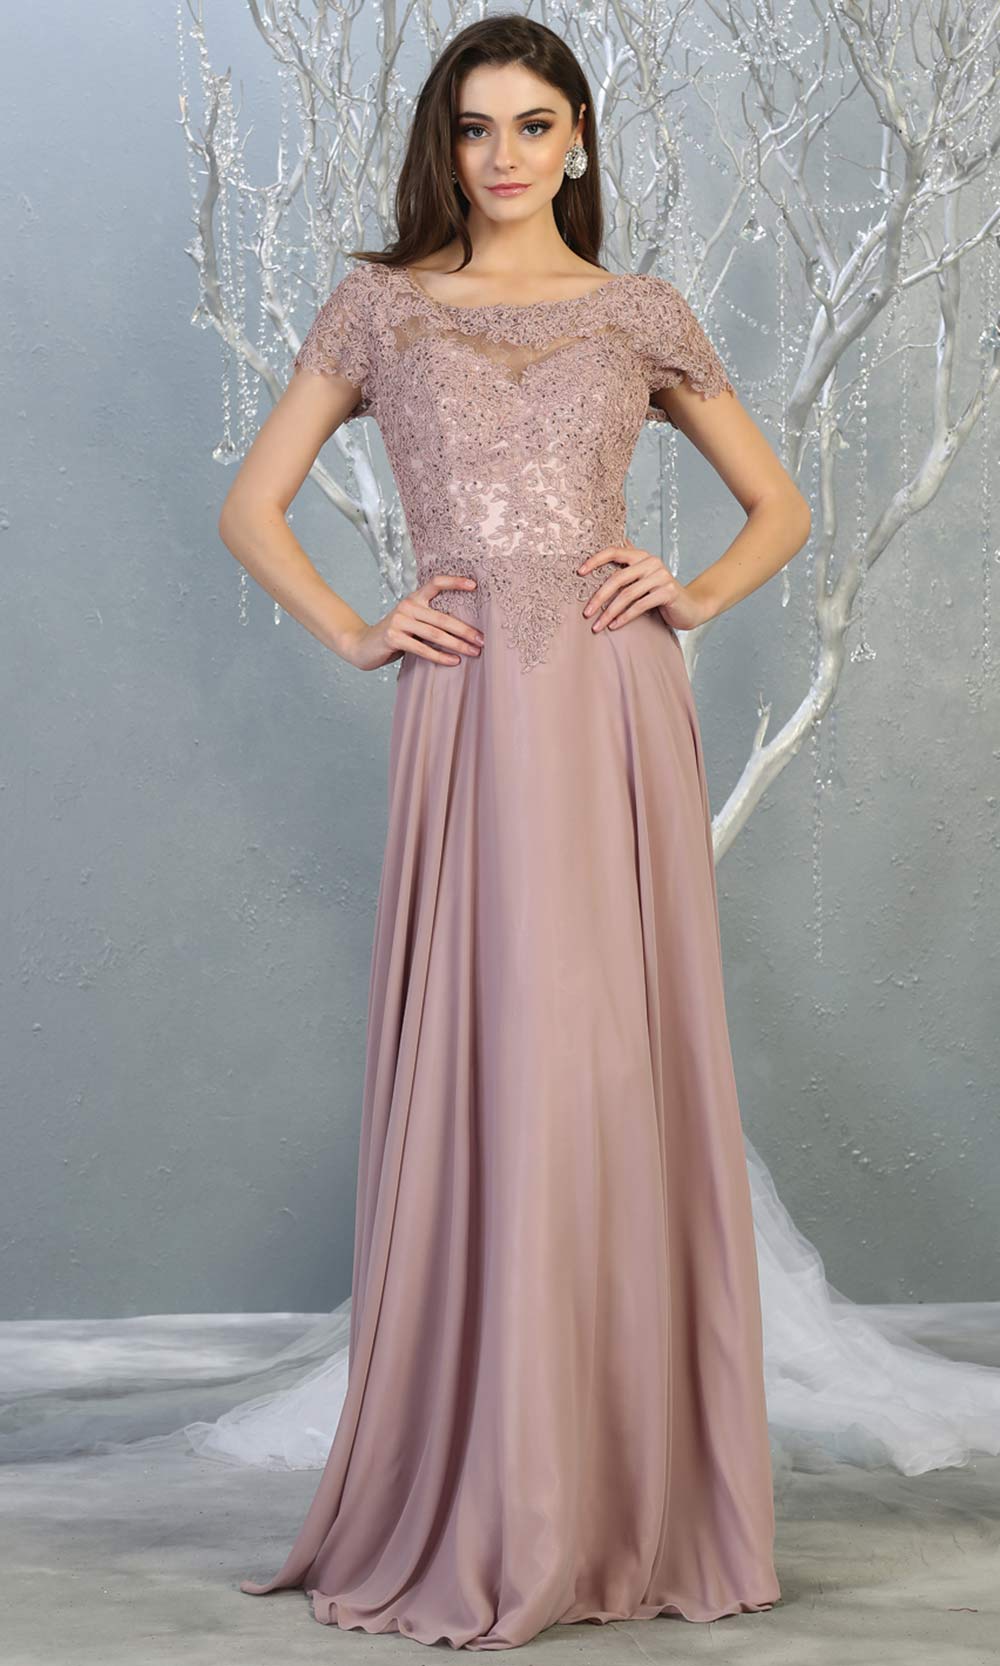 Mayqueen MQ1763 long mauve pink flowy modest dress with cap sleeves & lace top. This dusty rose dress is perfect for mother of the bride, formal wedding guest dress, covered up evening dress. It has a high neck & high back. Plus sizes avail.jpg